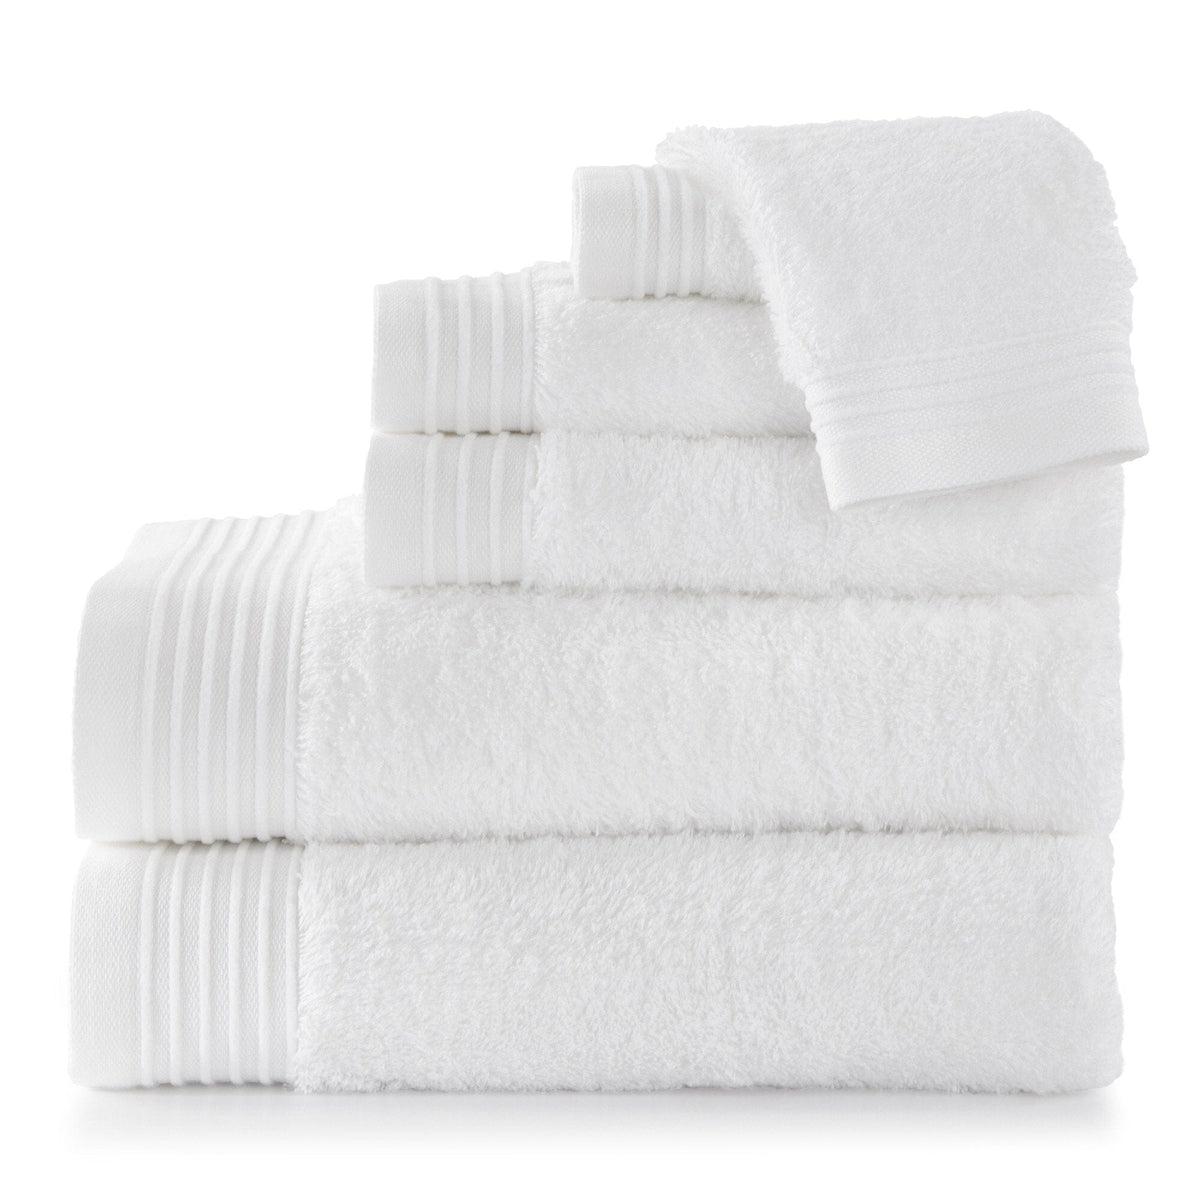 Bamboo White Bath Towel 6 Piece Sets | Peacock Alley at Fig Linens and Home